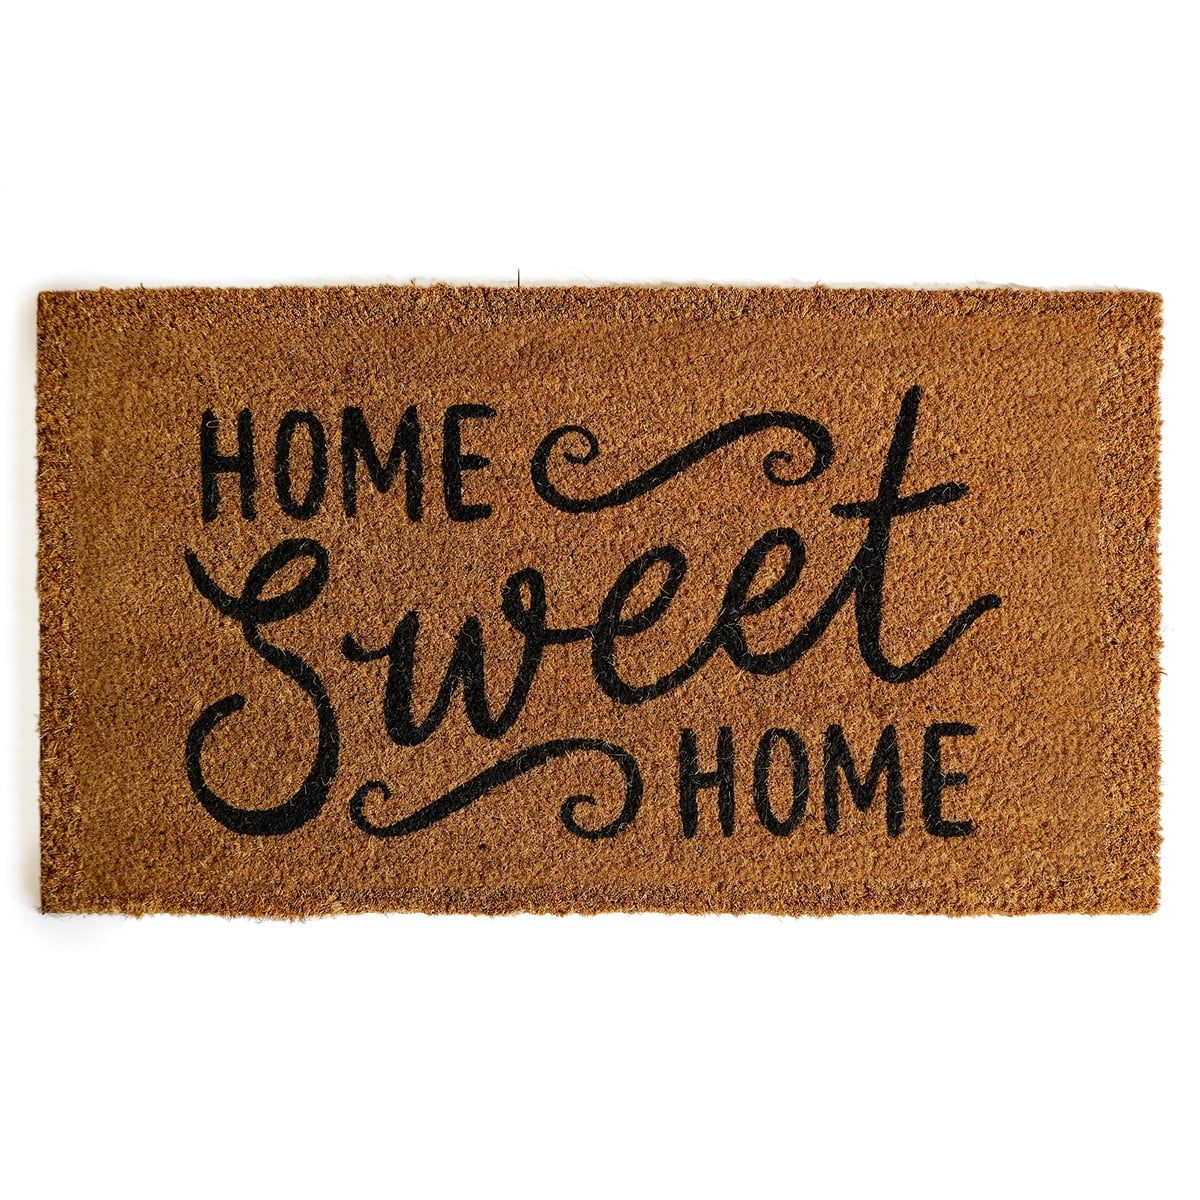  Layered Outdoor Home Sweet Home Mat Set - Coconut Coir (17-inch  x 30-inch) and Woven Doormat (24-inch x 35-inch) Combo Inside Outside Pet  Friendly Rug for Entry Porch or Patio (Black